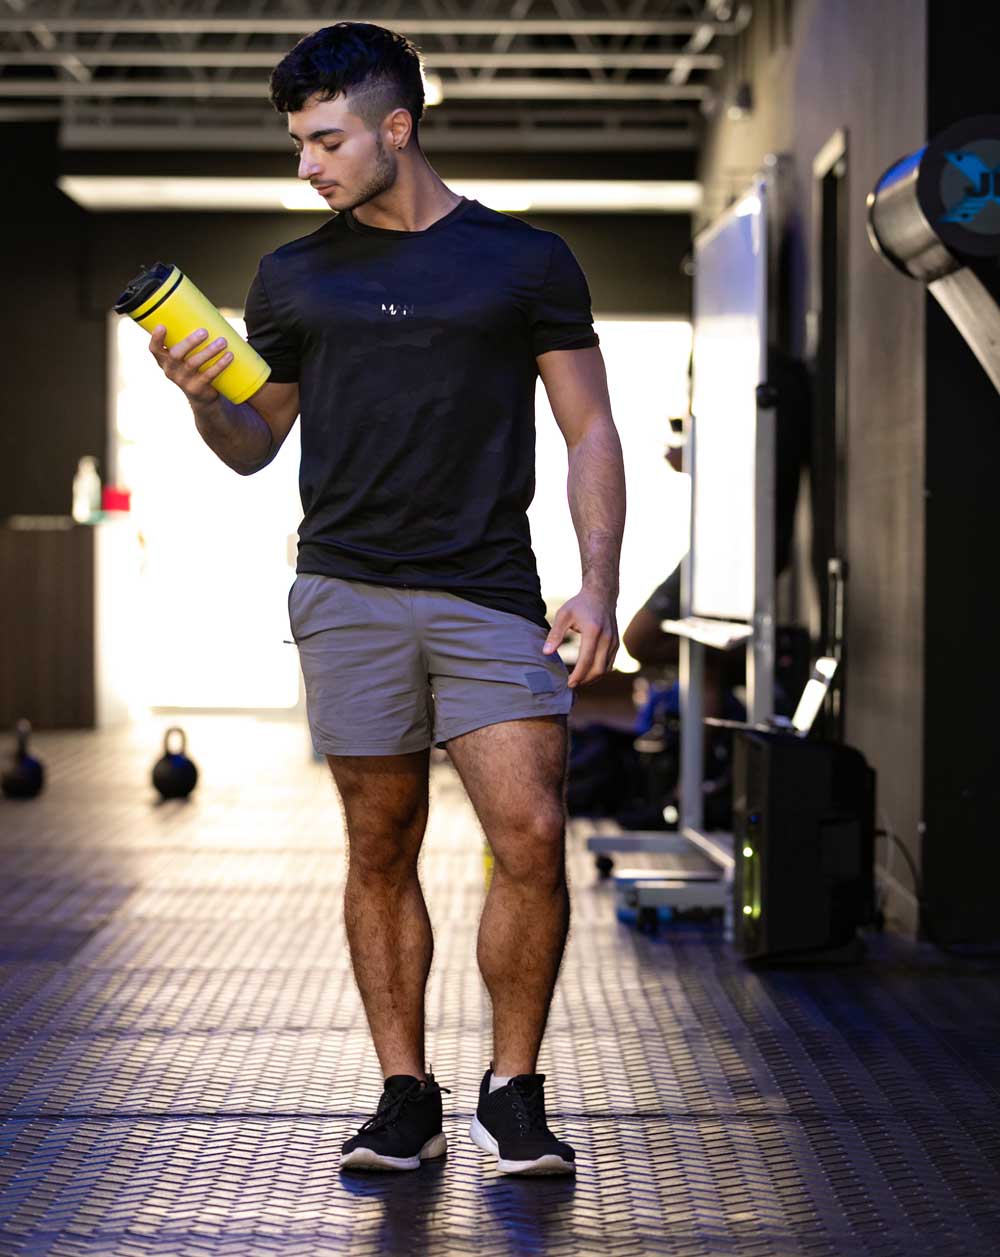 How Ice Shaker Bottles Can Help You Stay Hydrated & Boost Your Productivity